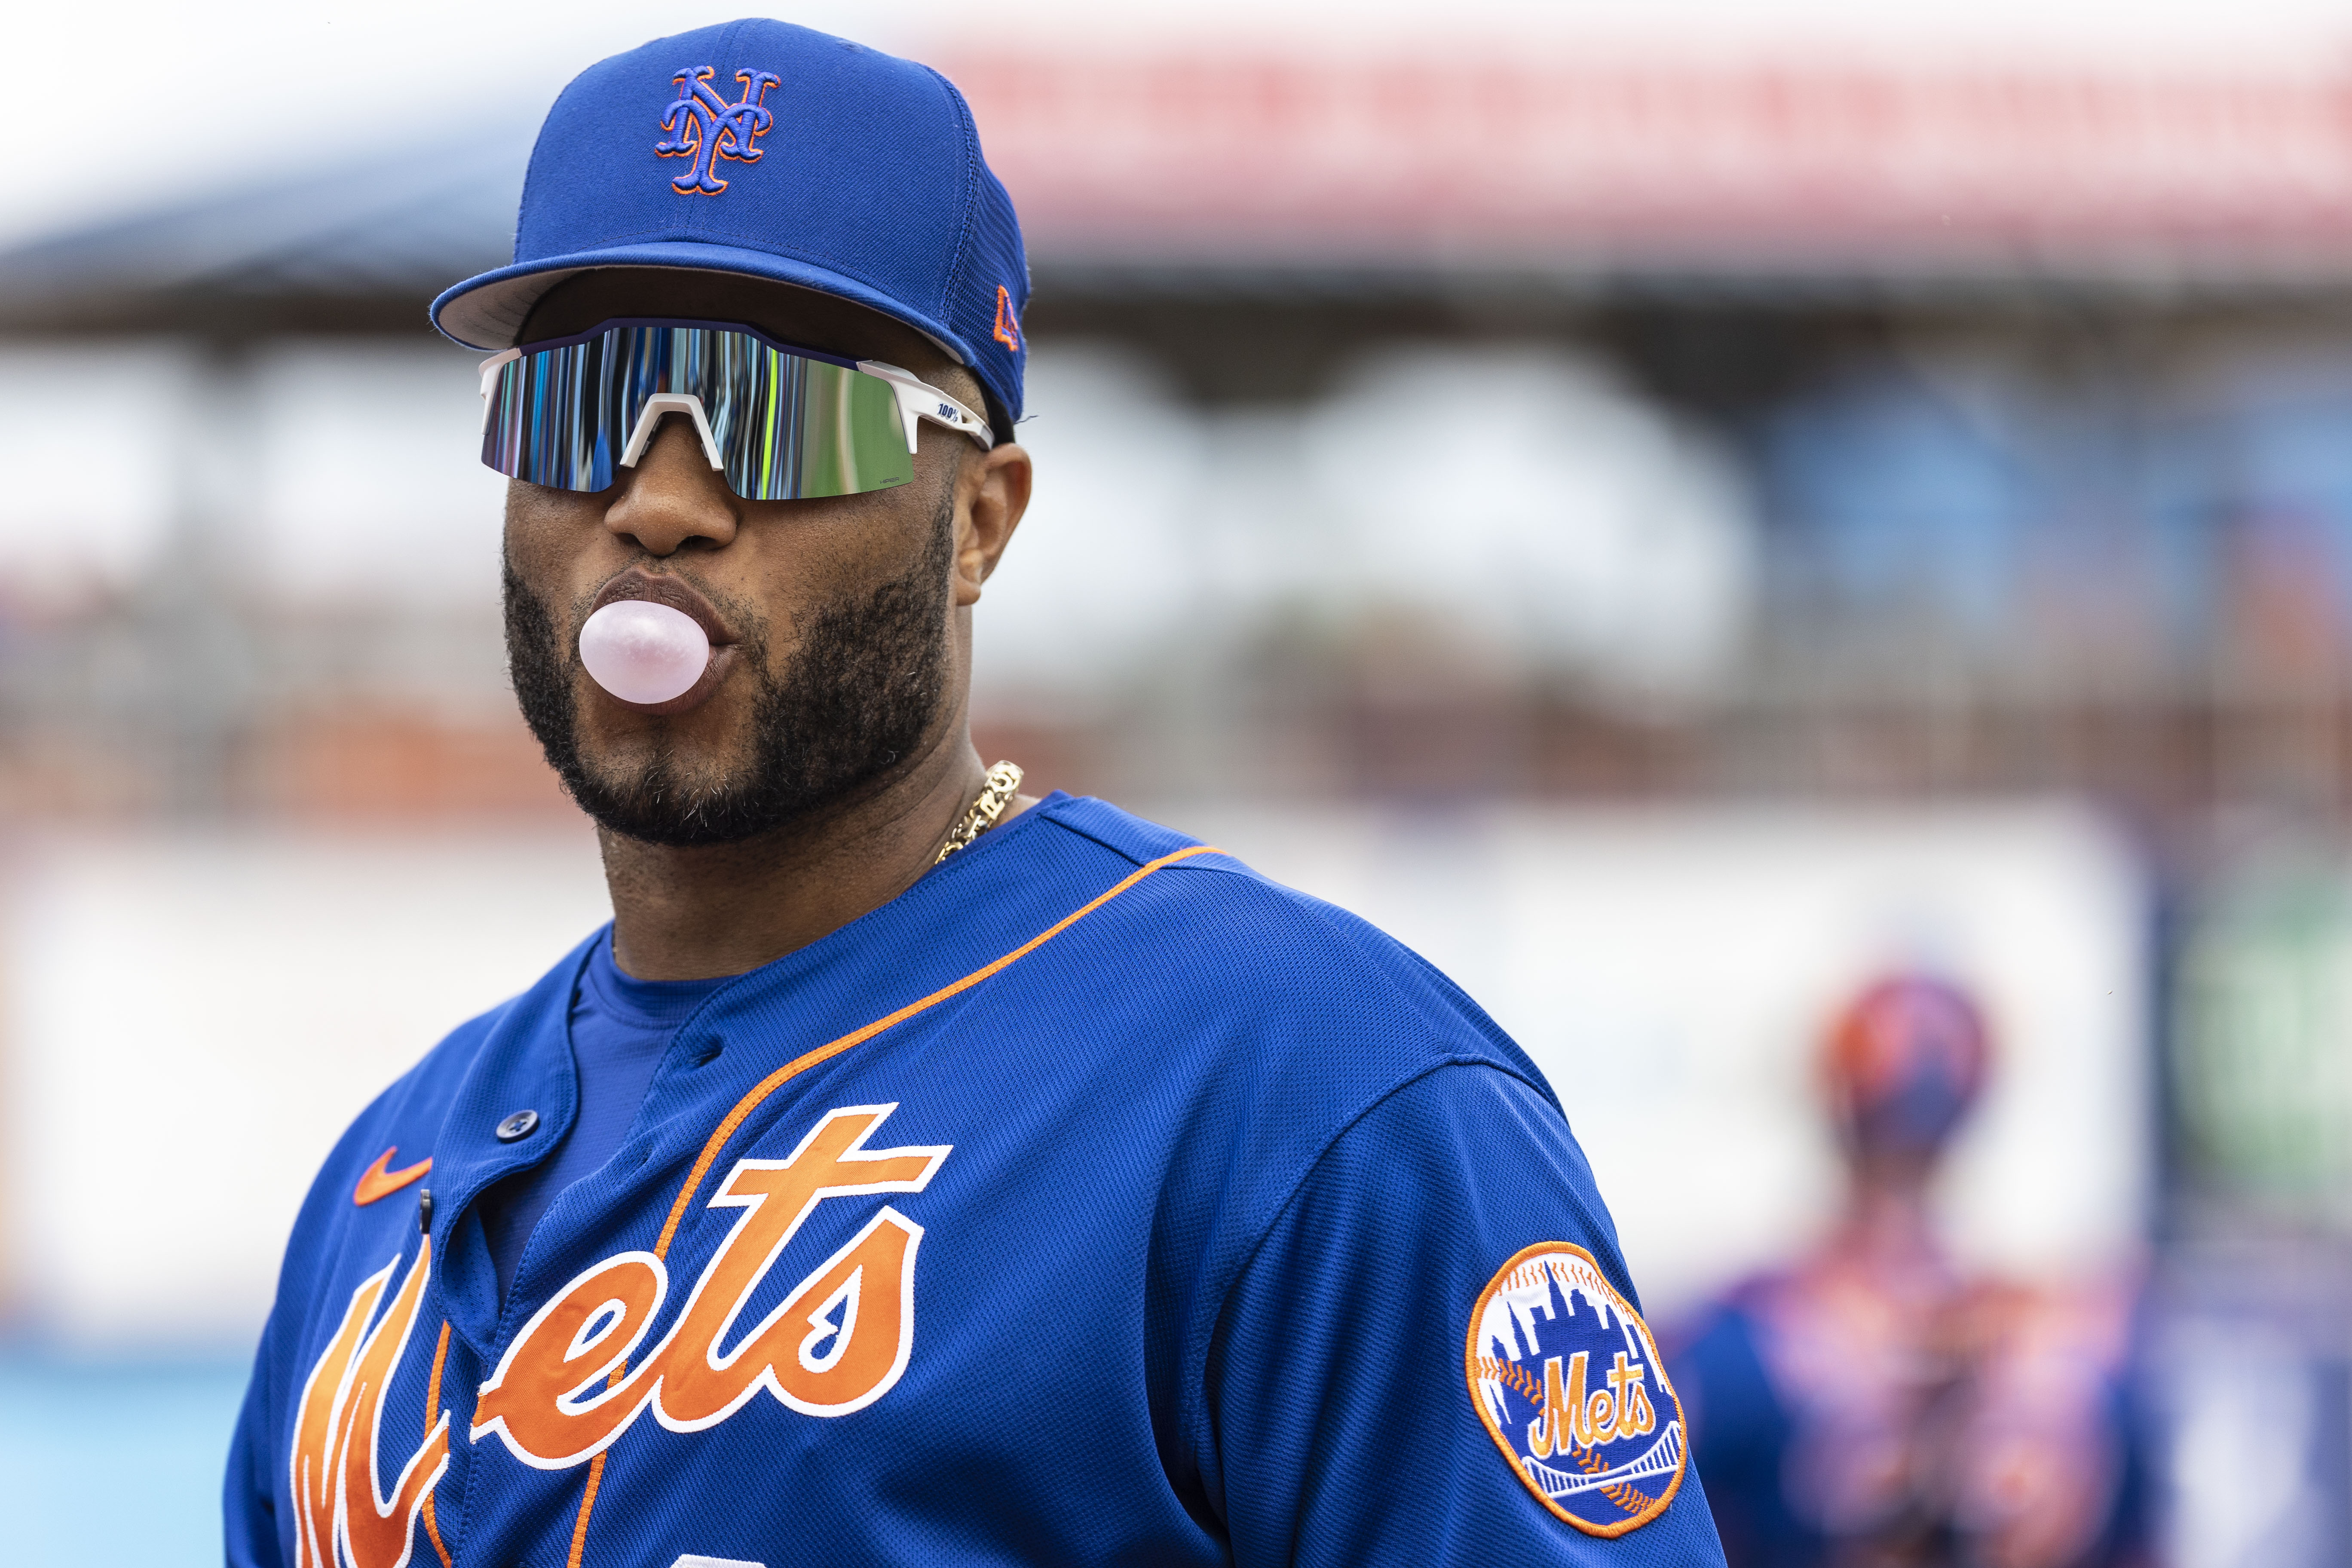 New York Mets Robinson Cano as seen before a spring training game in Port St. Lucie, Florida